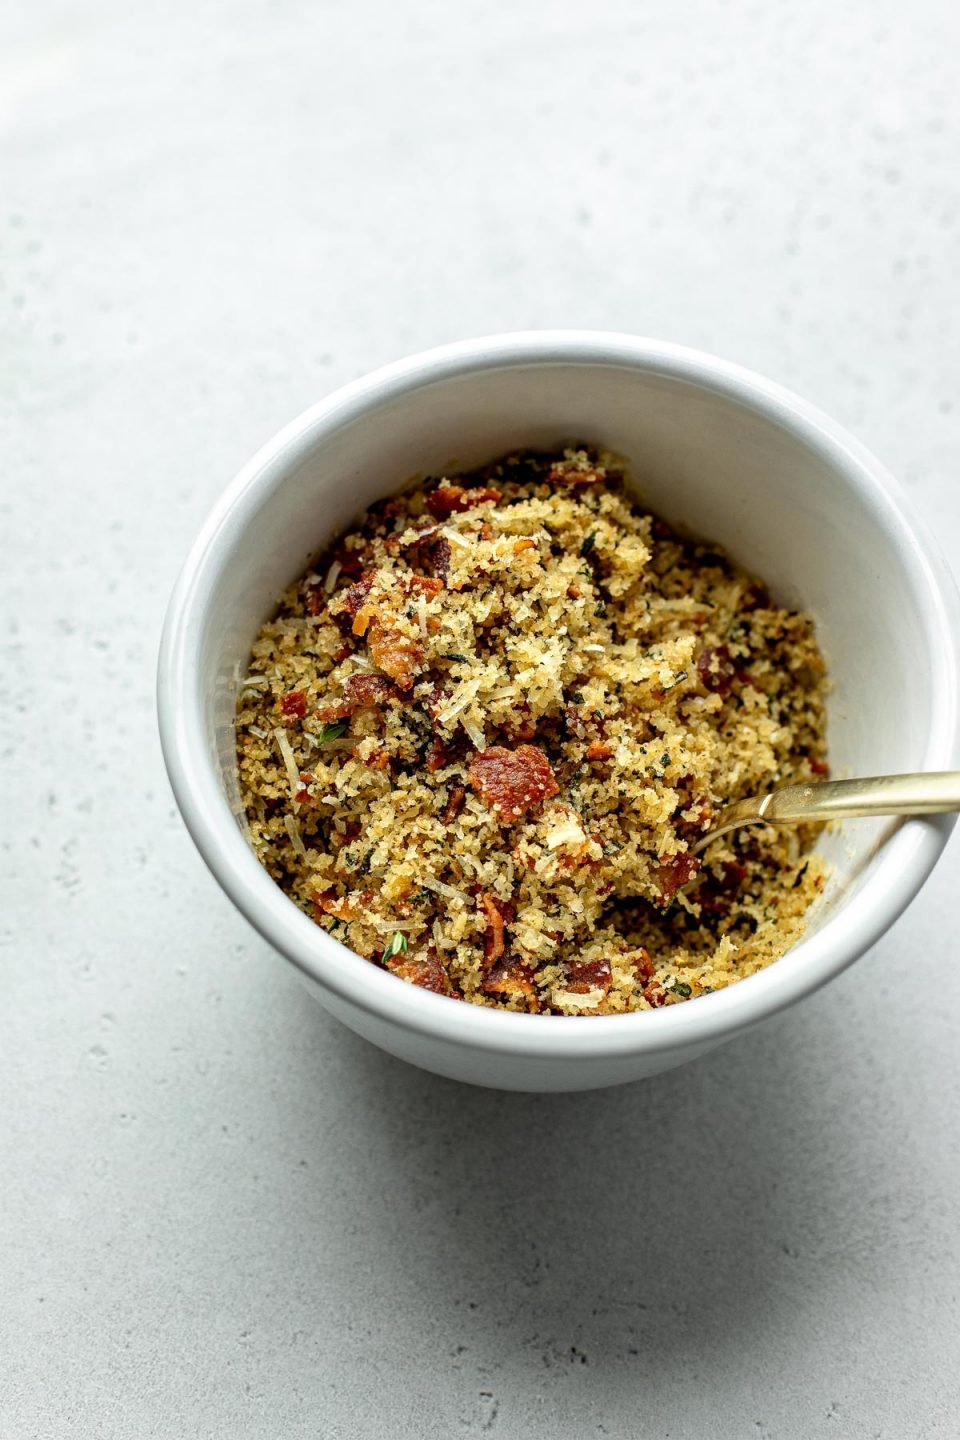 A side angle shot of a small white ceramic bowl filled with bacon breadcrumb topping and a gold spoon rests atop a creamy white textured surface.